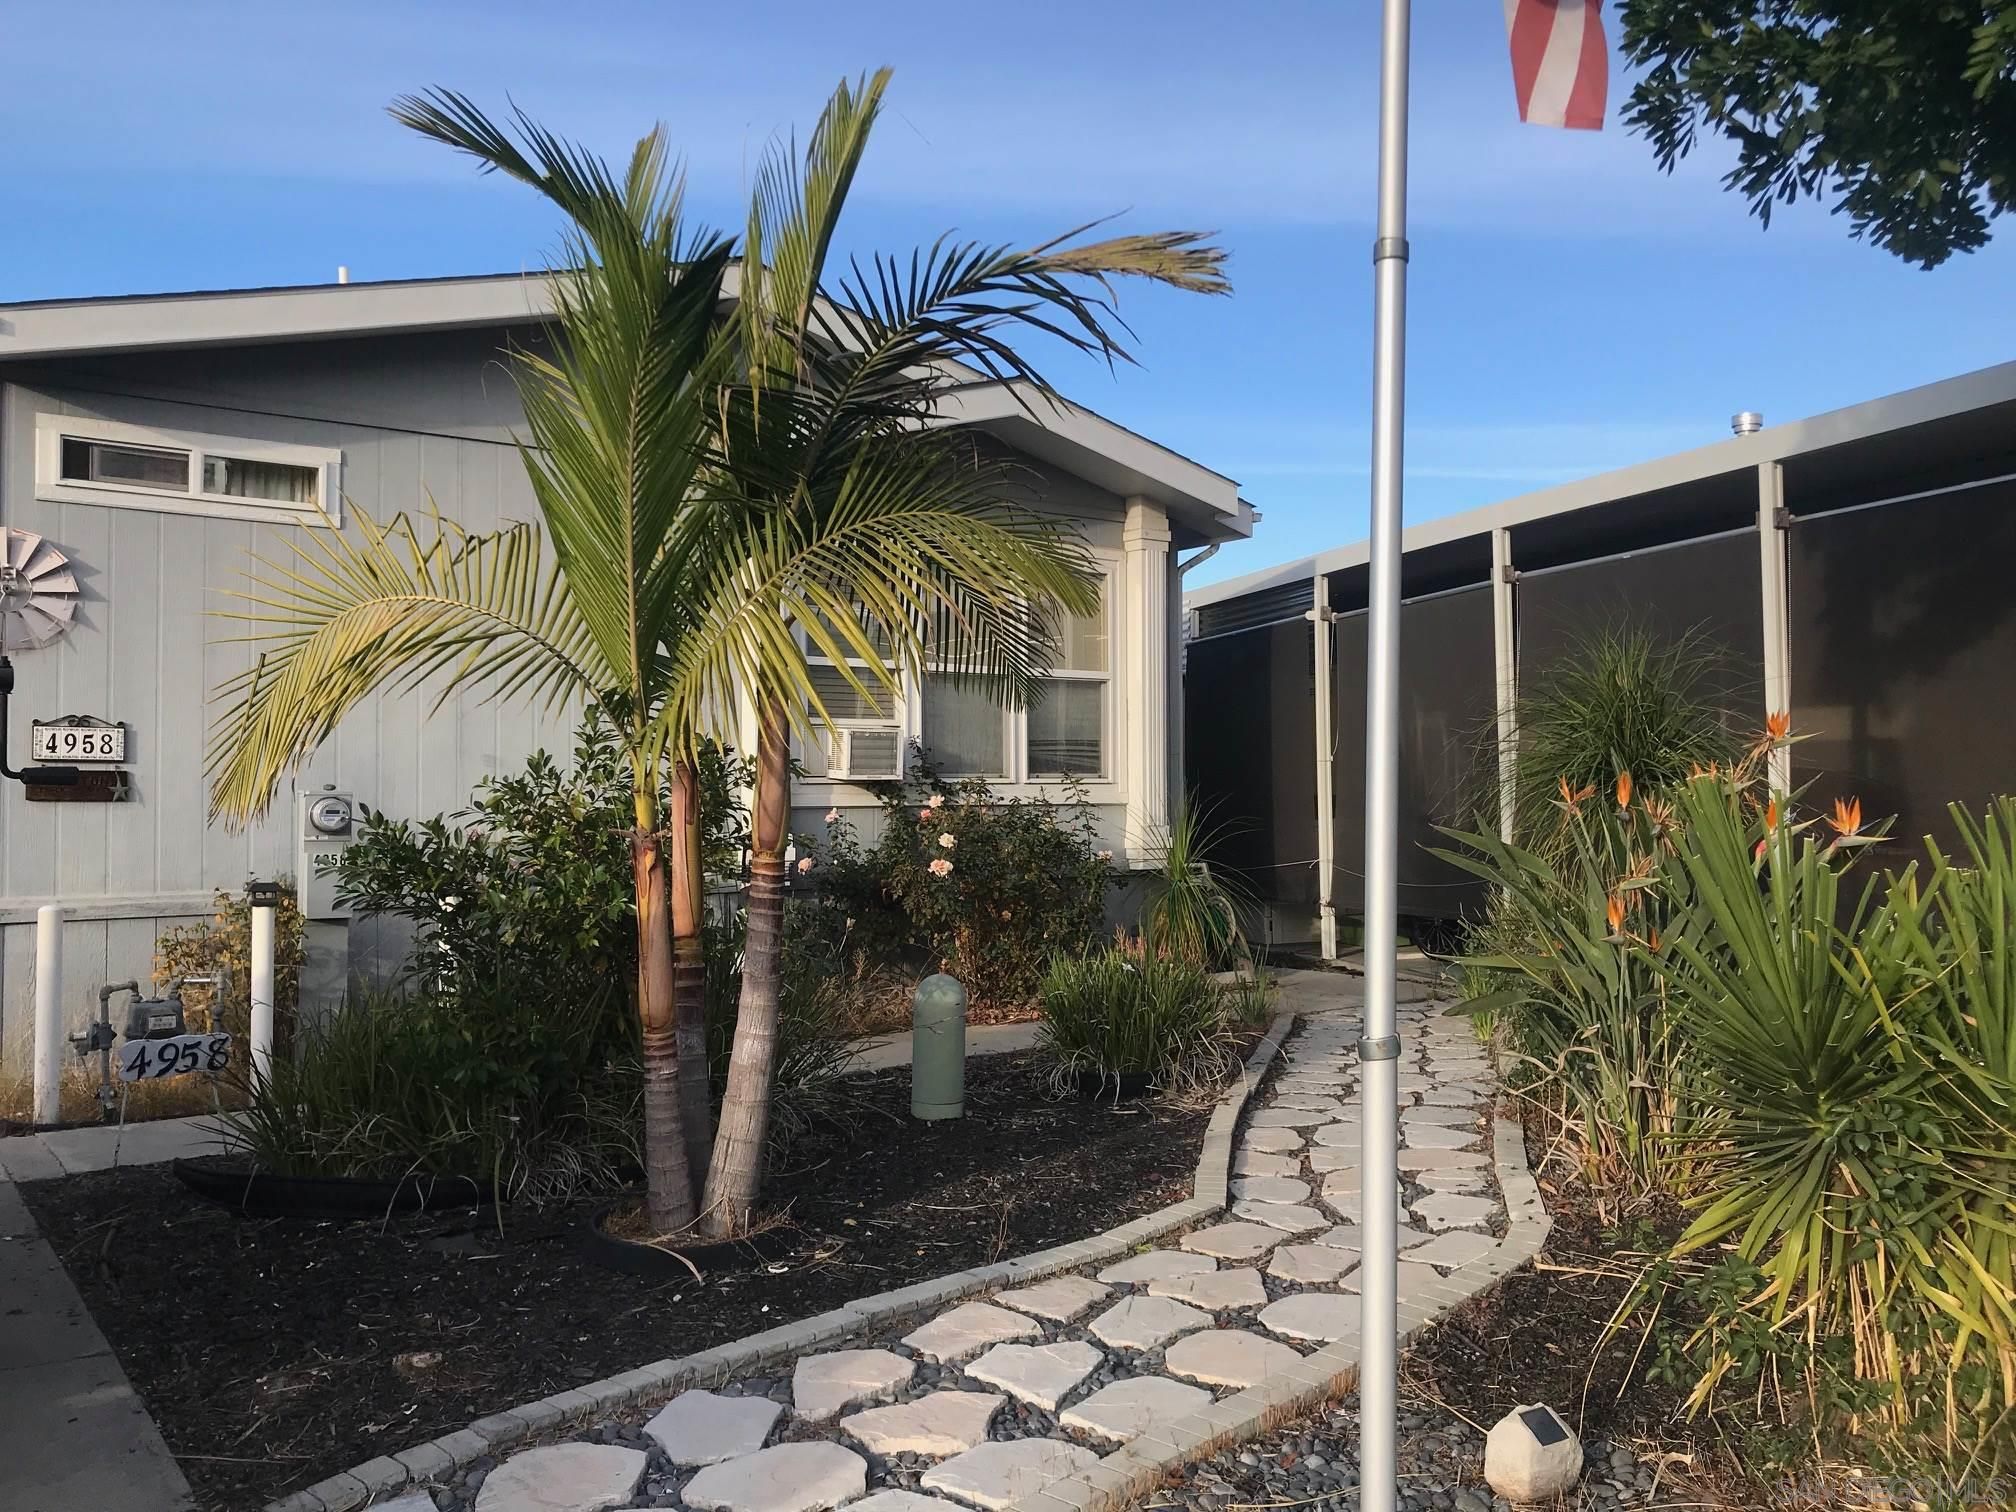 Main Photo: SAN DIEGO Manufactured Home for sale : 3 bedrooms : 4958 Old Cliffs Rd #4958